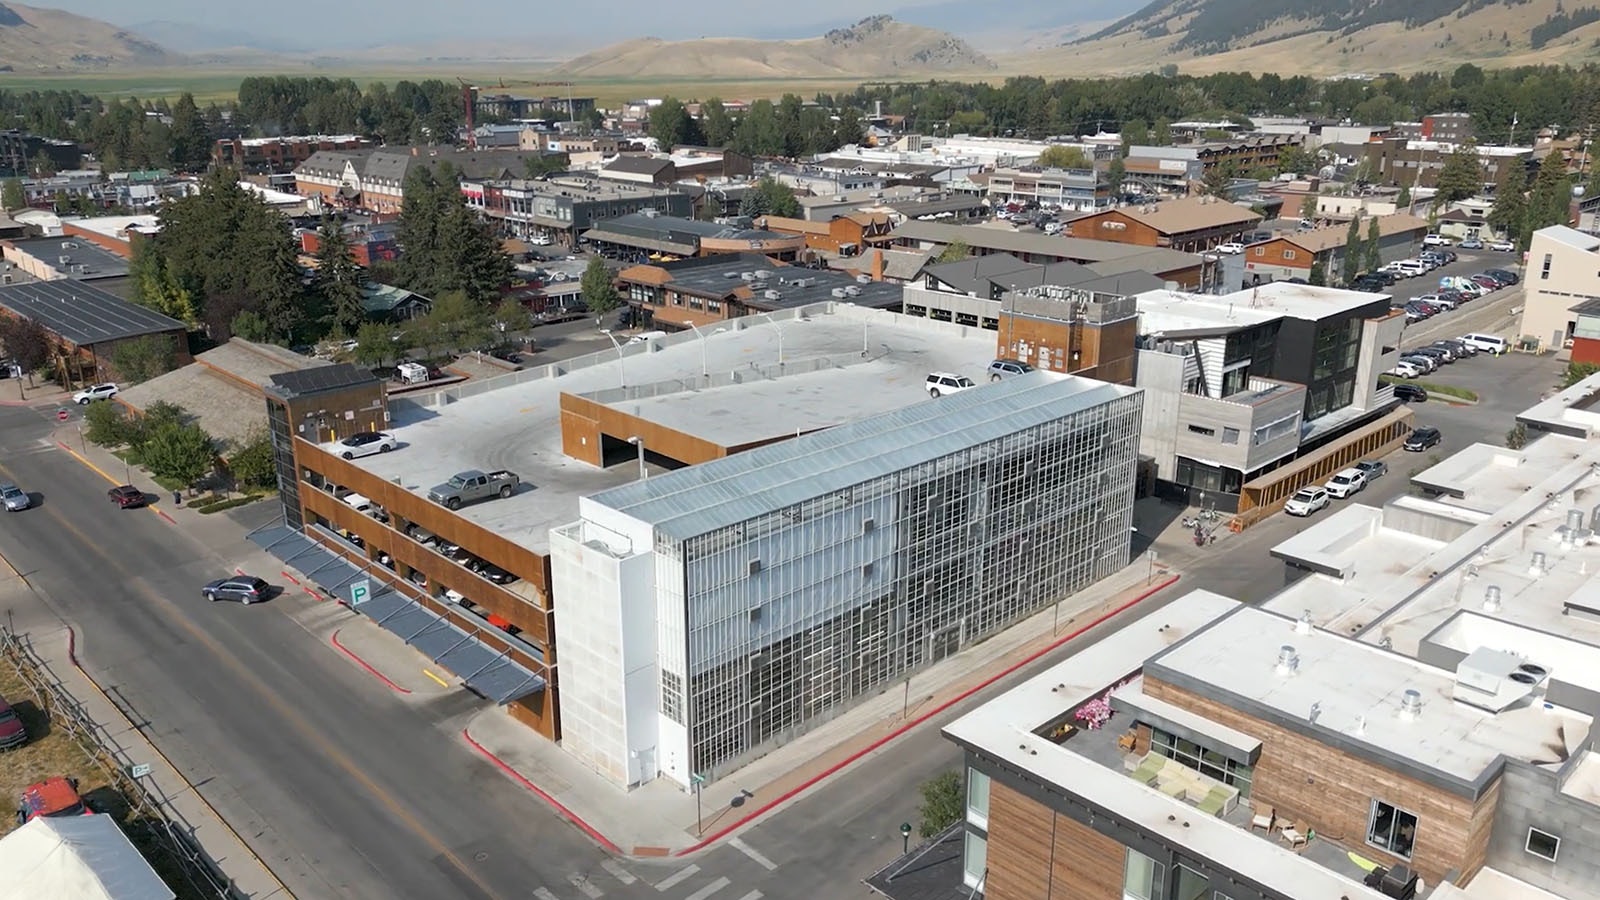 Vertical Harvest's flagship facility in Jackson, Wyoming.